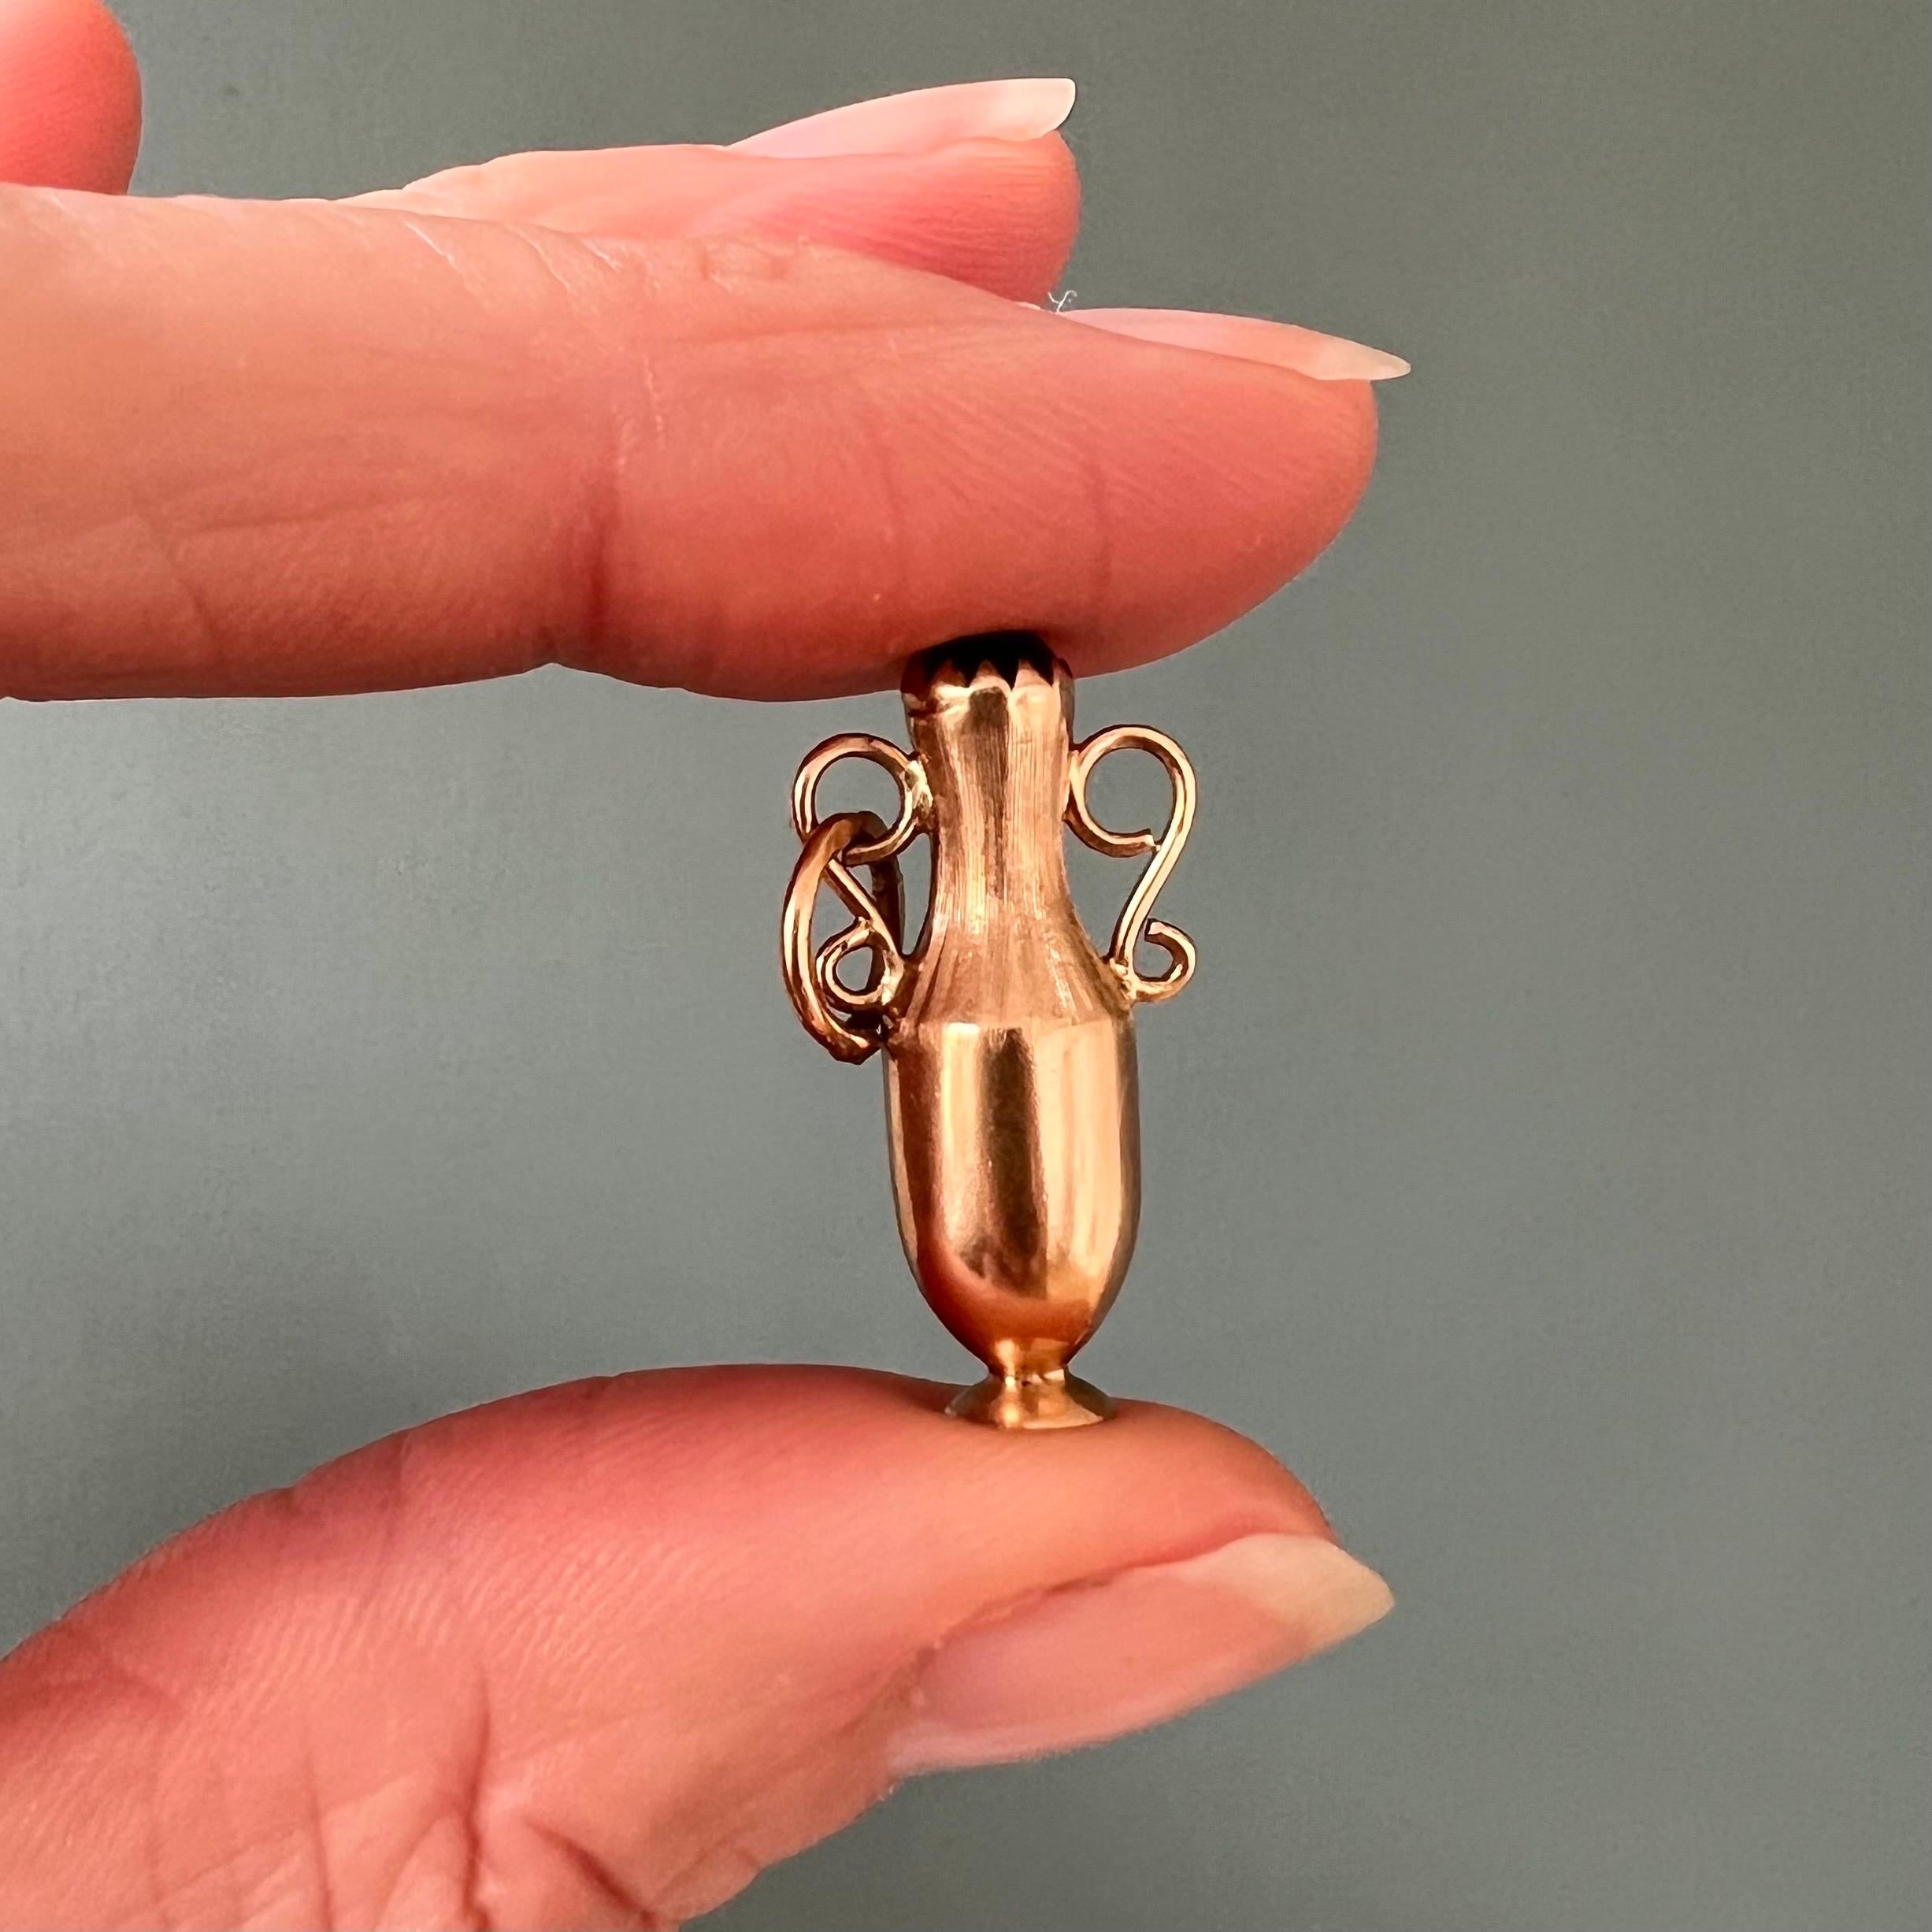 A lovely vintage 18 karat yellow gold Greek Amphora vase jug charm pendant. The charm is nicely modeled into an ancient Greek-style Amphora jug and set with a green stone at the top. The bottle neck has a matte satin finish while the lower part is